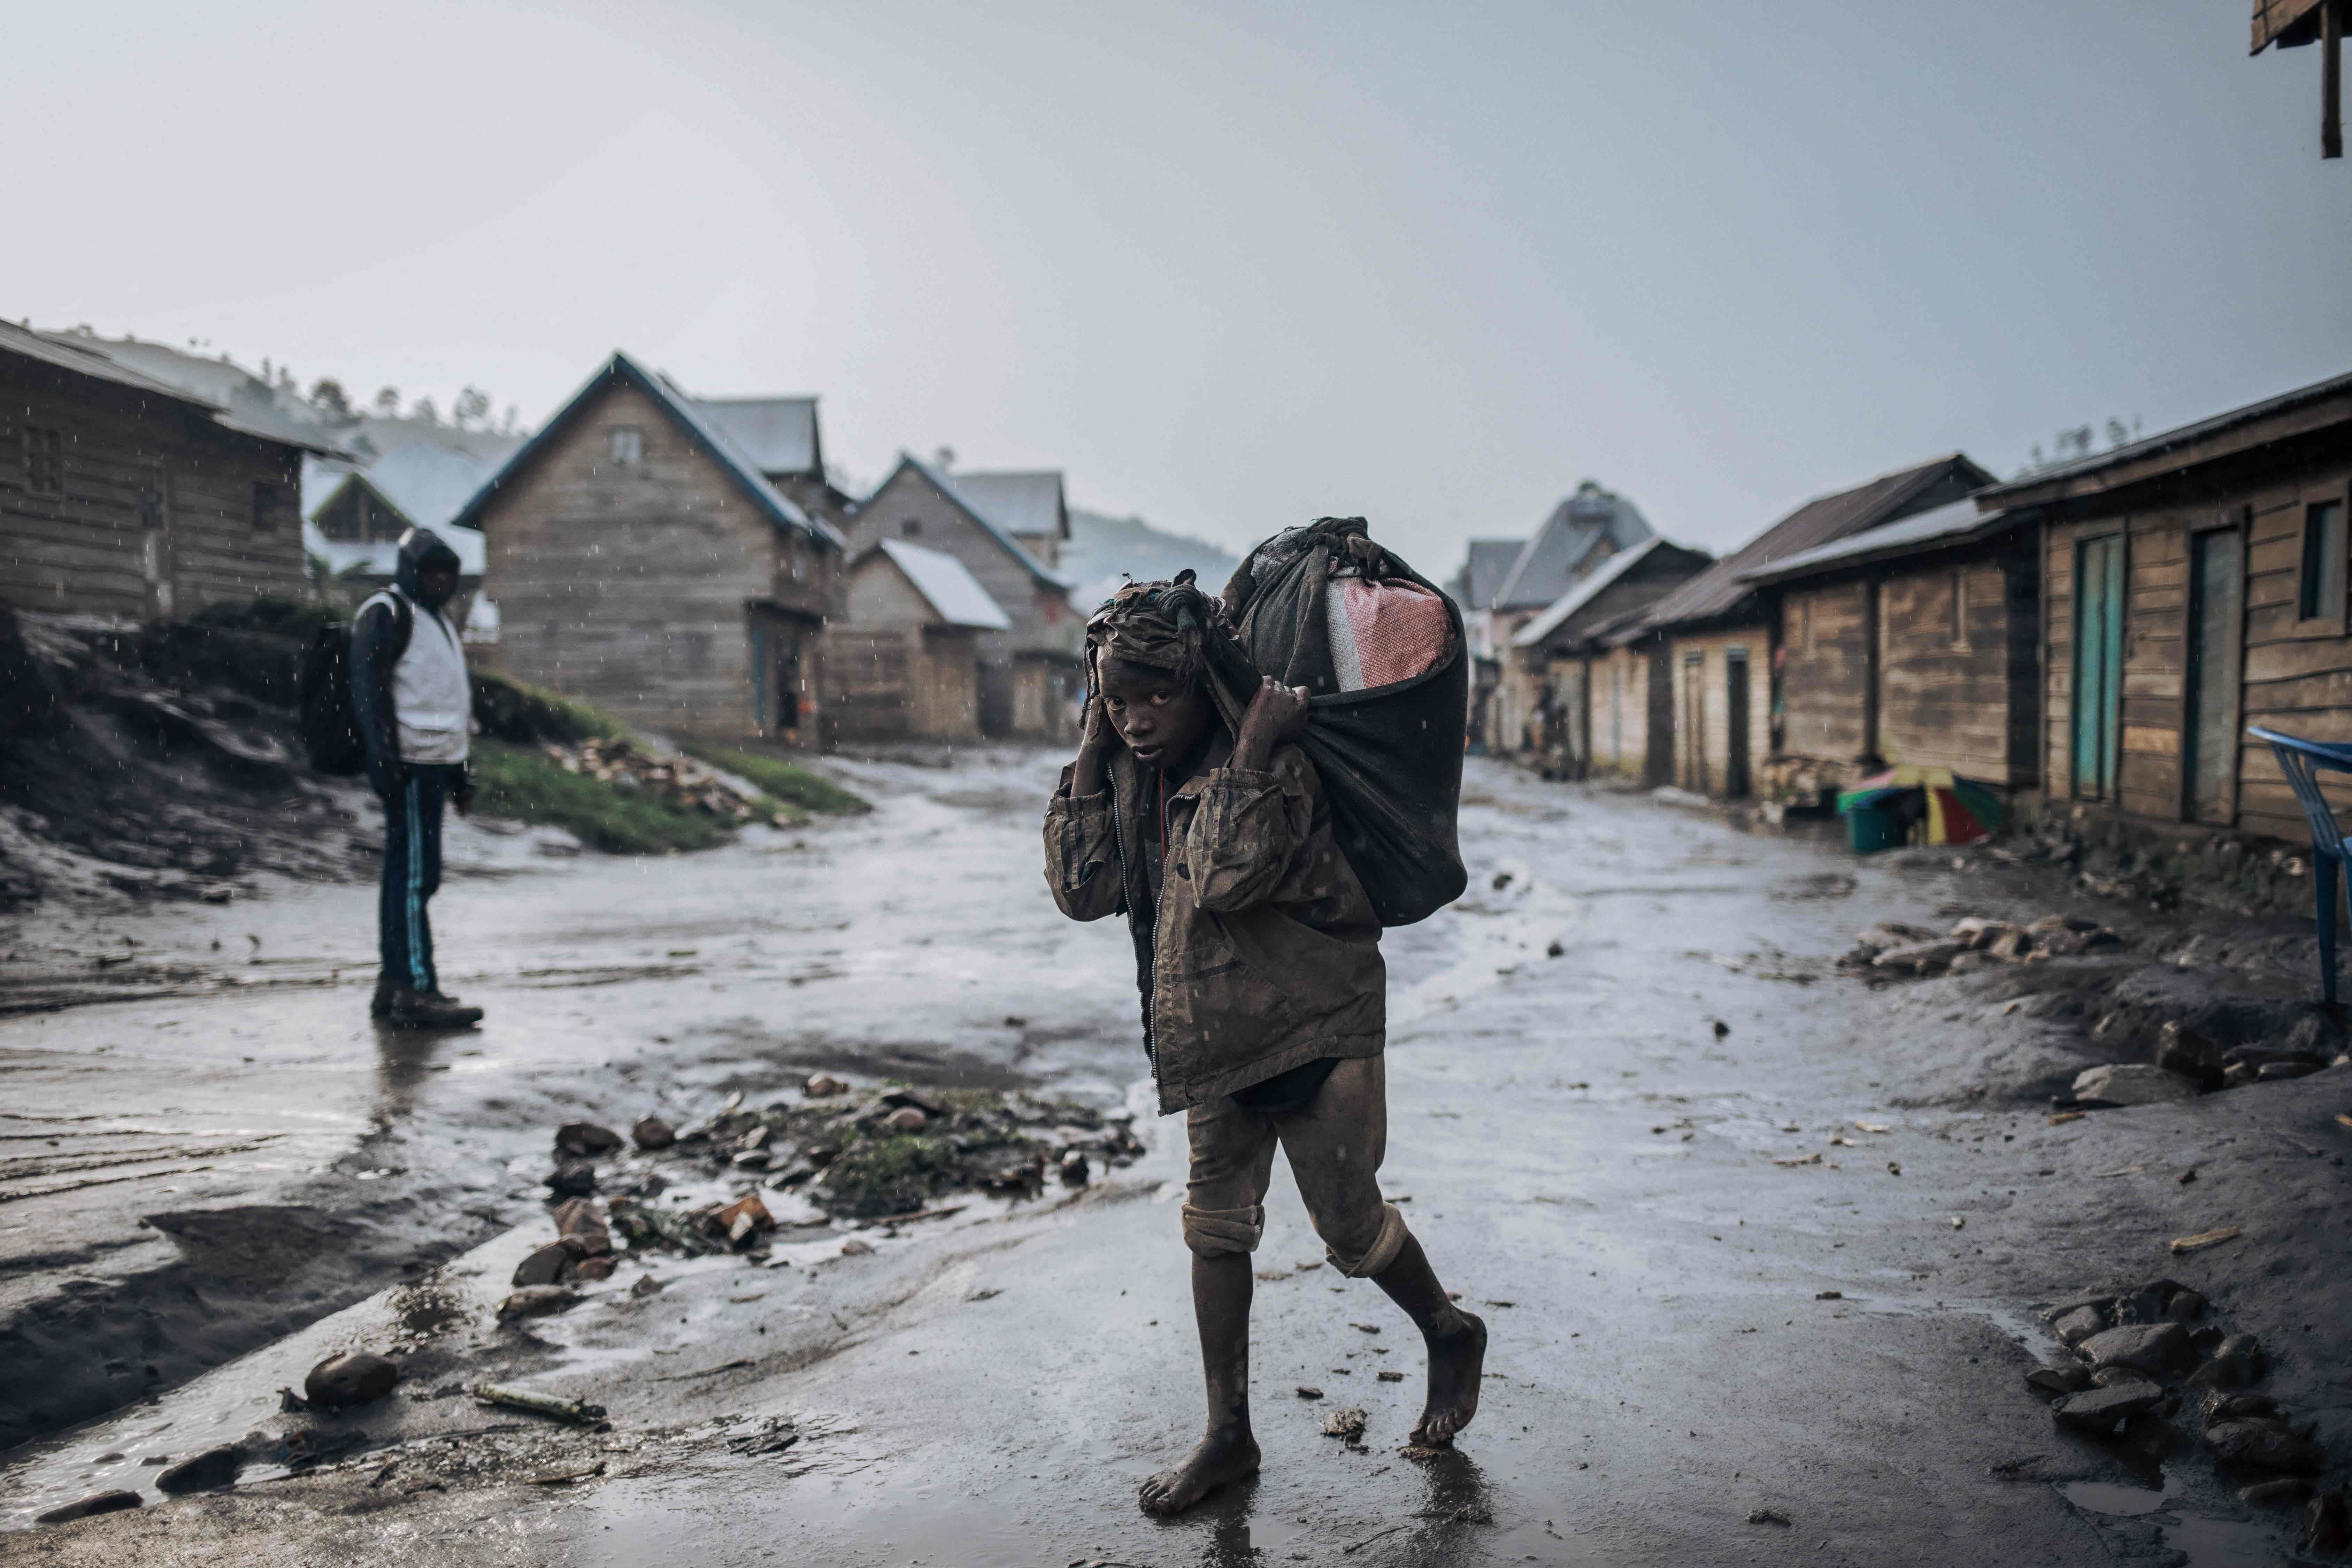 A child carries goods on his back in the rain on the main street of Muheto, a three-hour motorcycle ride from Masisi Centre in the mountains where armed groups regularly attack, on March 28, 2022, in North Kivu province, eastern Democratic Republic of Congo. Credit: AFP Photo